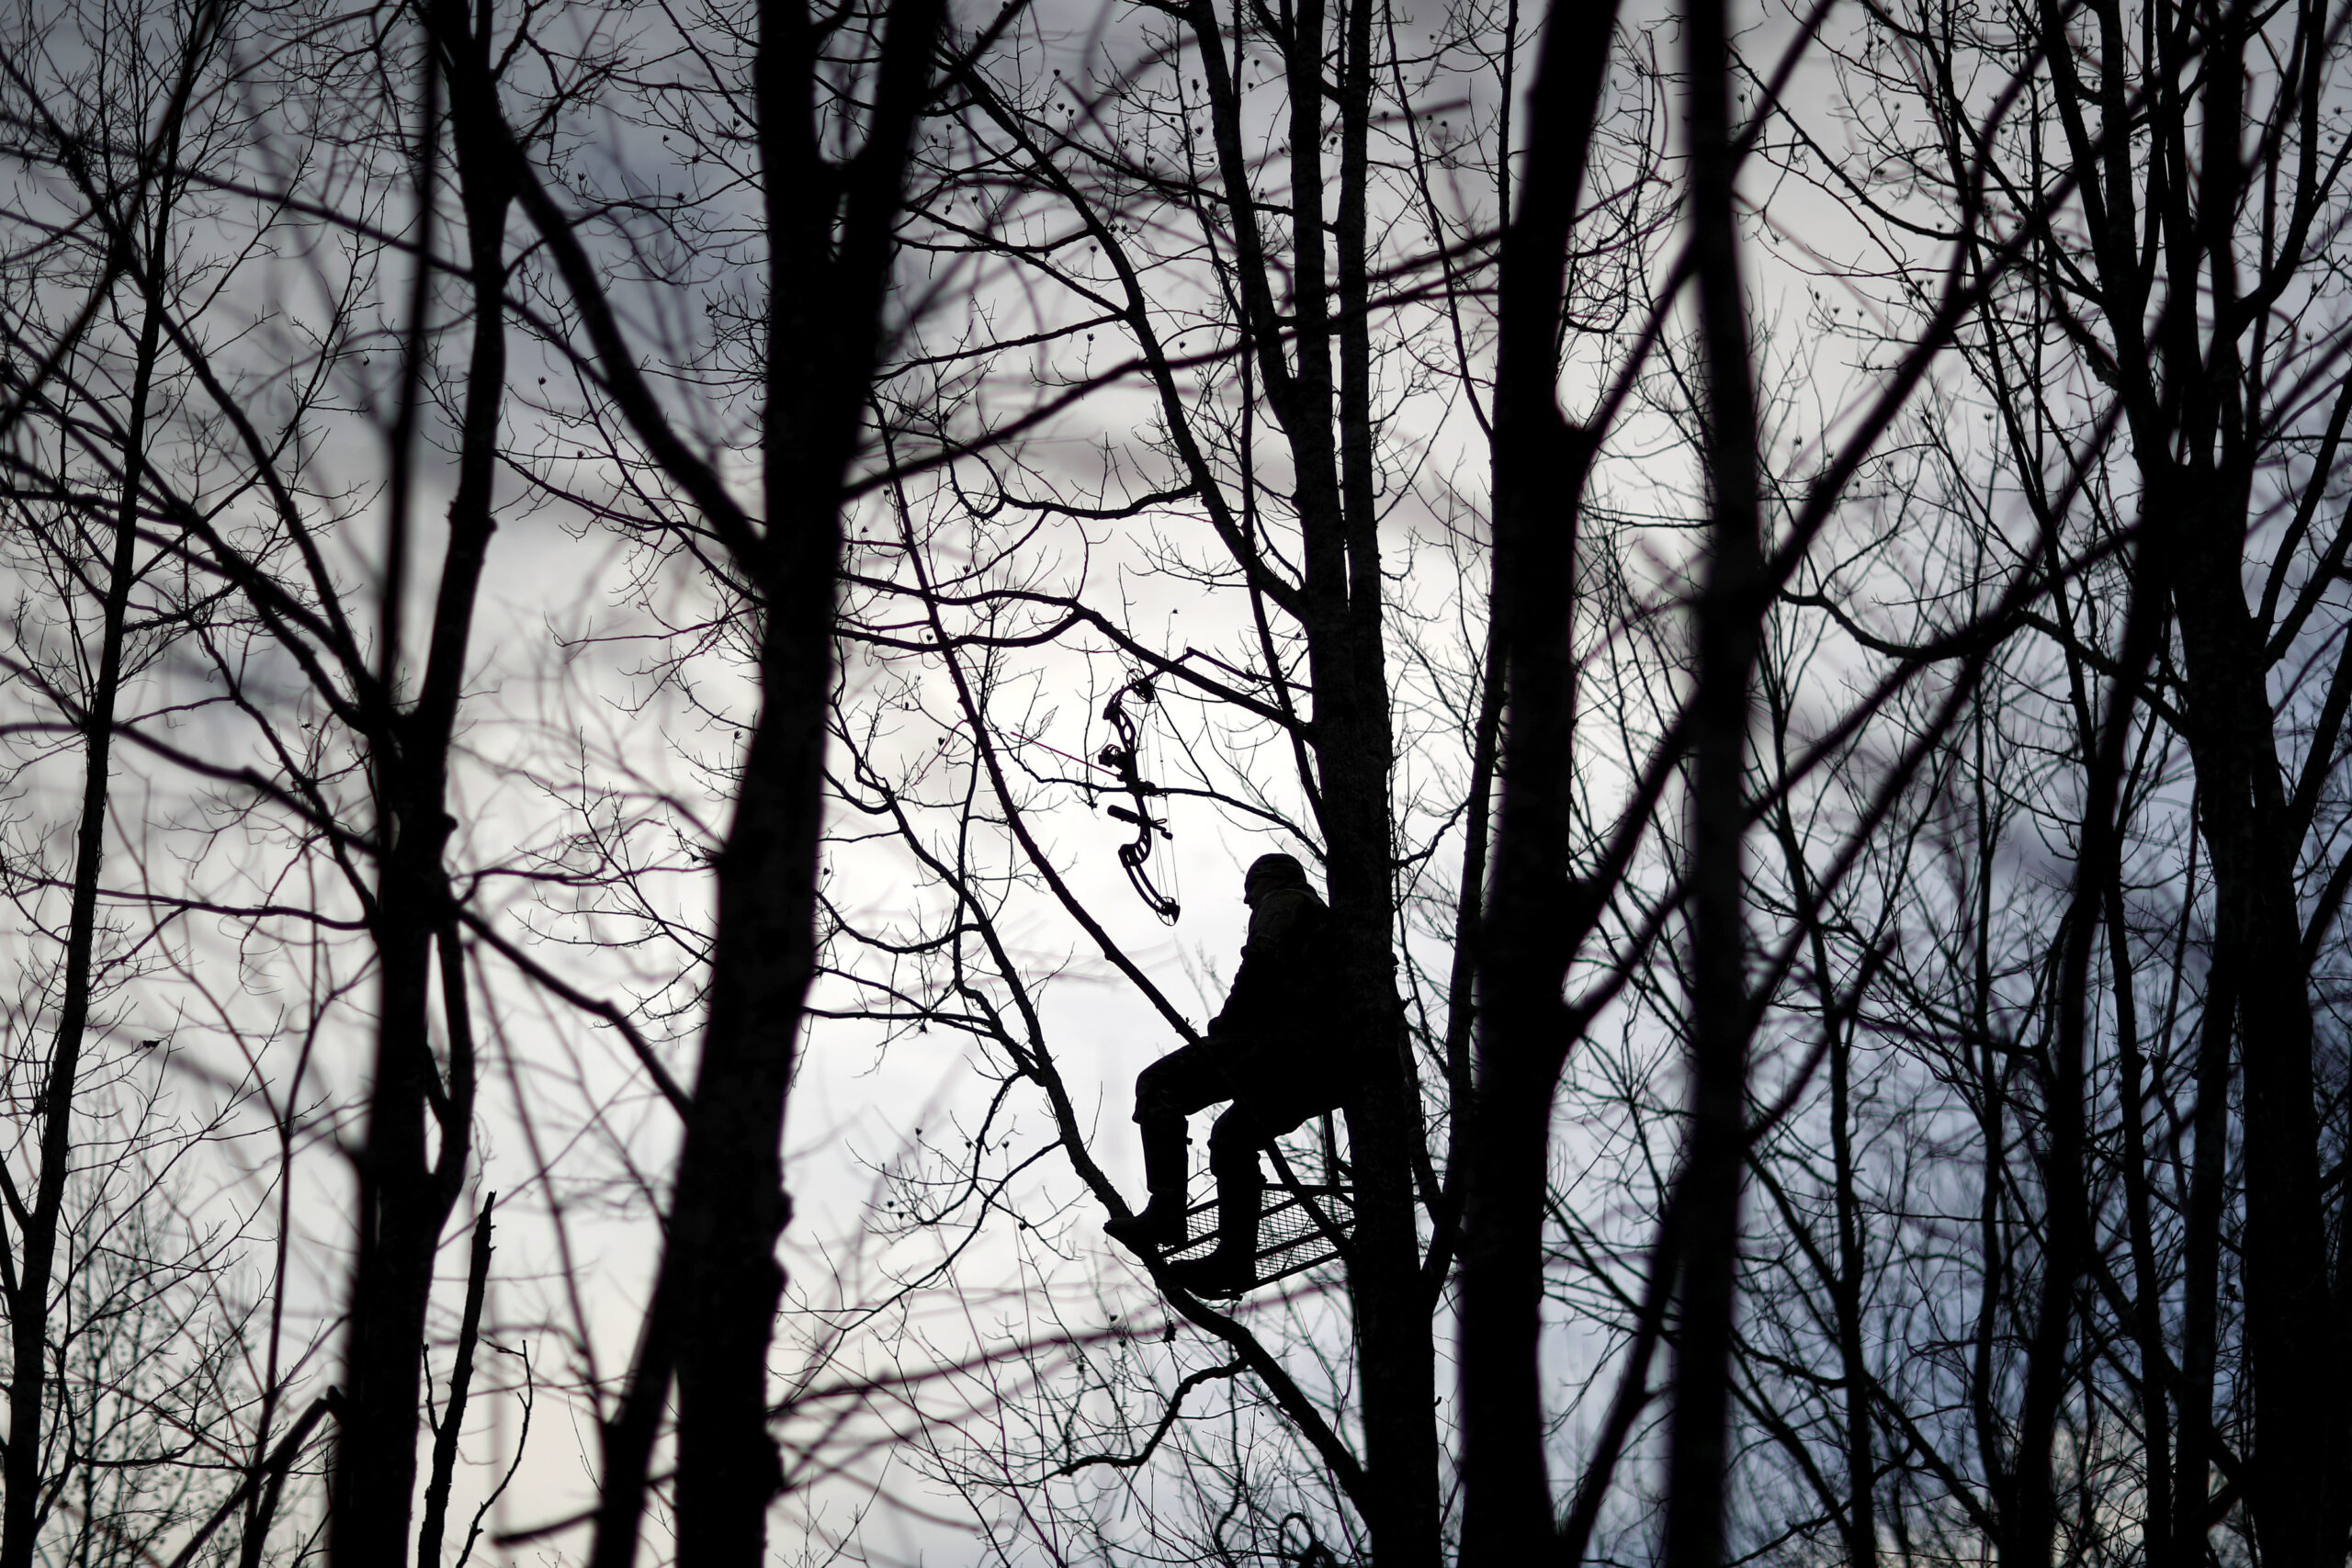 Dale Ferguson sits in a tree while hunting for deer with a bow and arrow in Isonville, Ky.